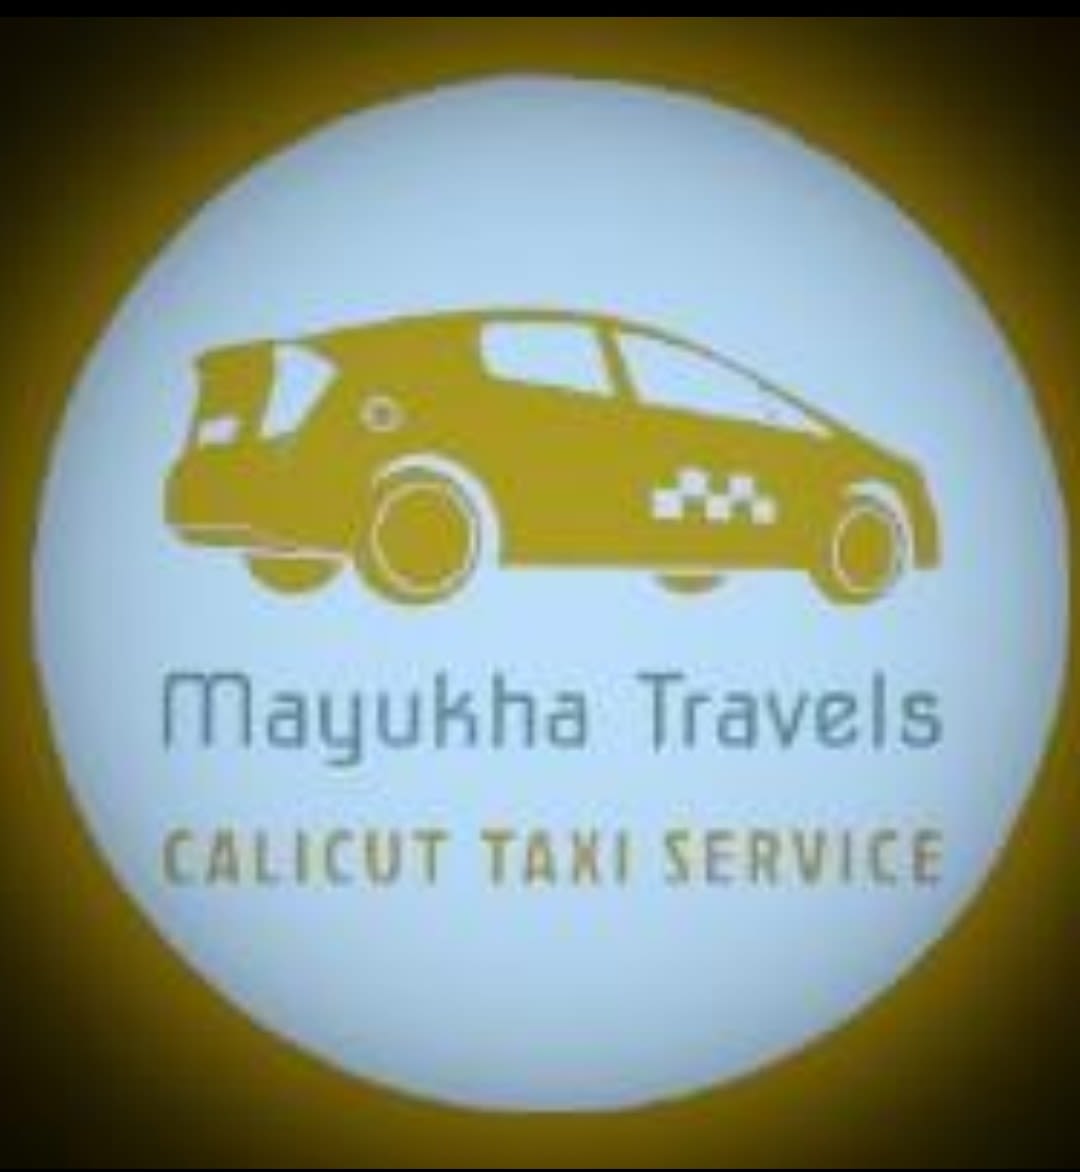 CALICUT TAXI SERVICE 24 HOURS,Online Taxi Booking, Airport,Railway pickup